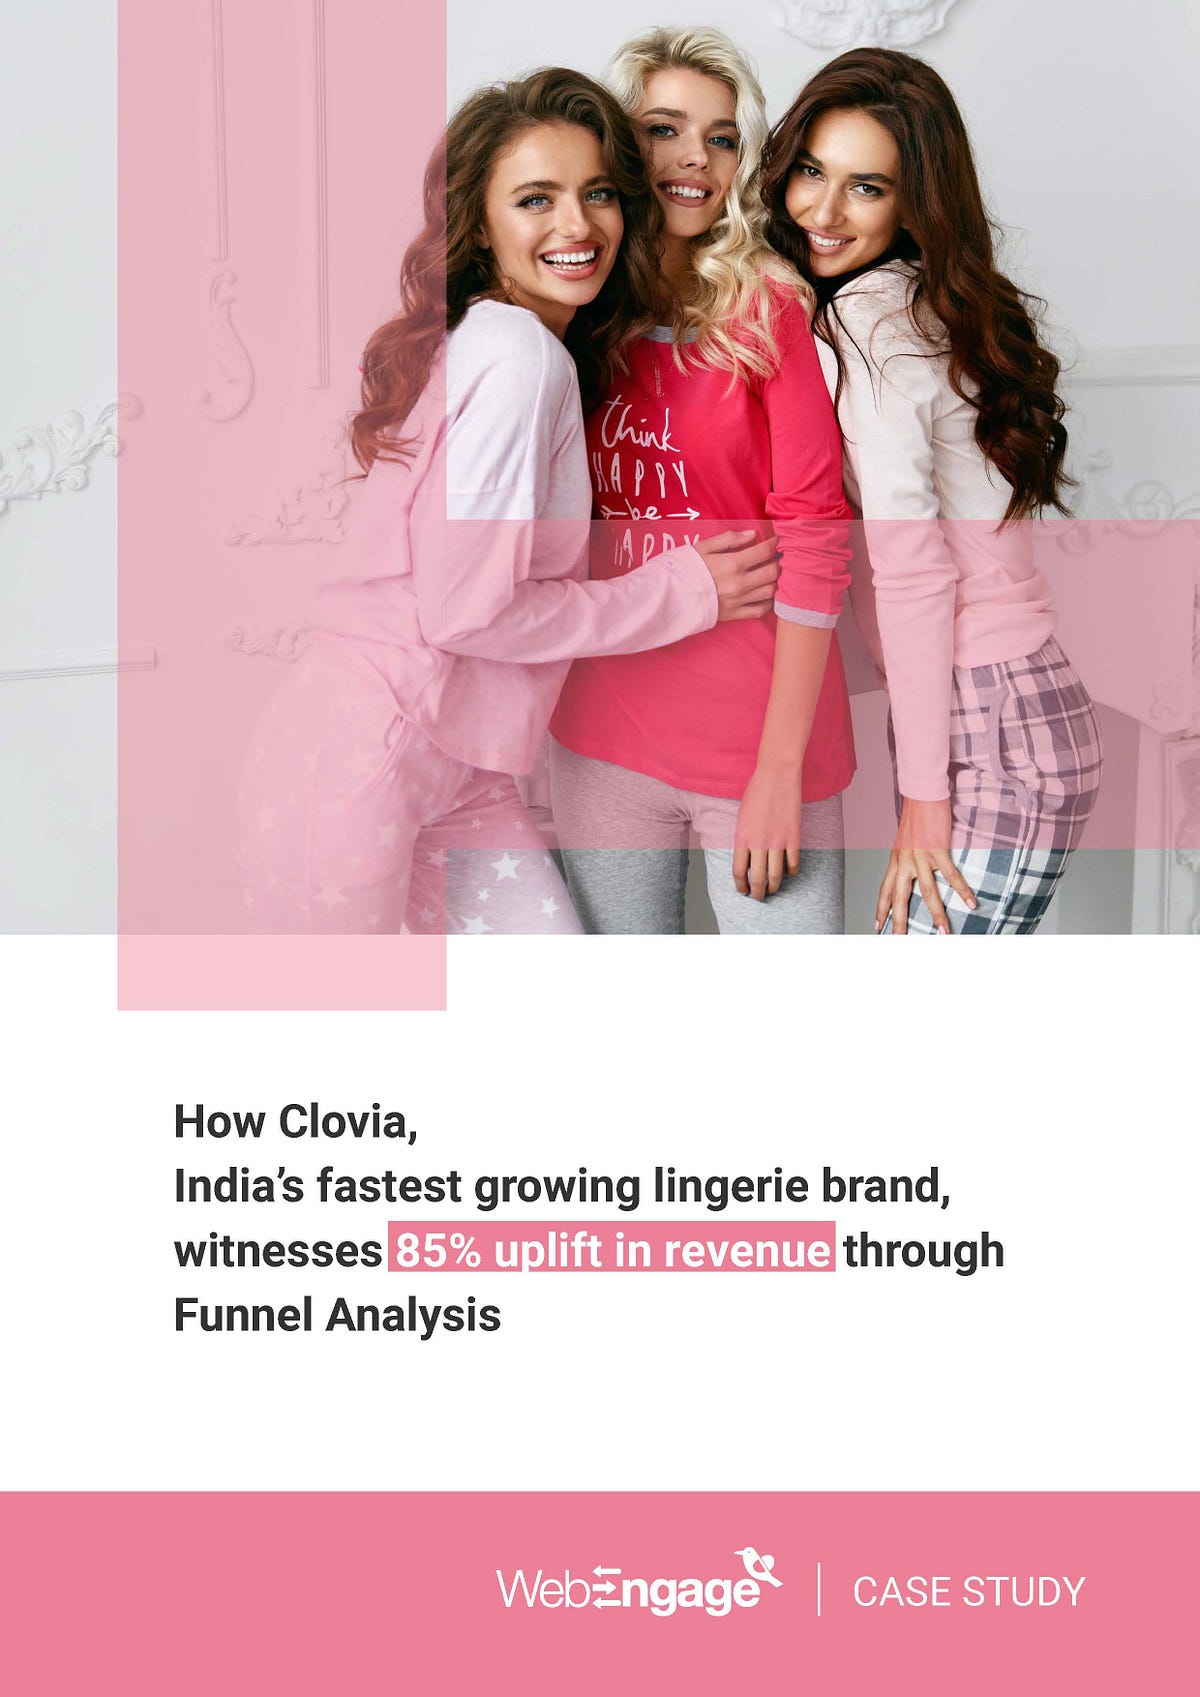 Case Study] India's Fastest Growing Lingerie Brand, Clovia, Witnesses 85%  Uplift In Its Revenue!, by Kinjal Shah